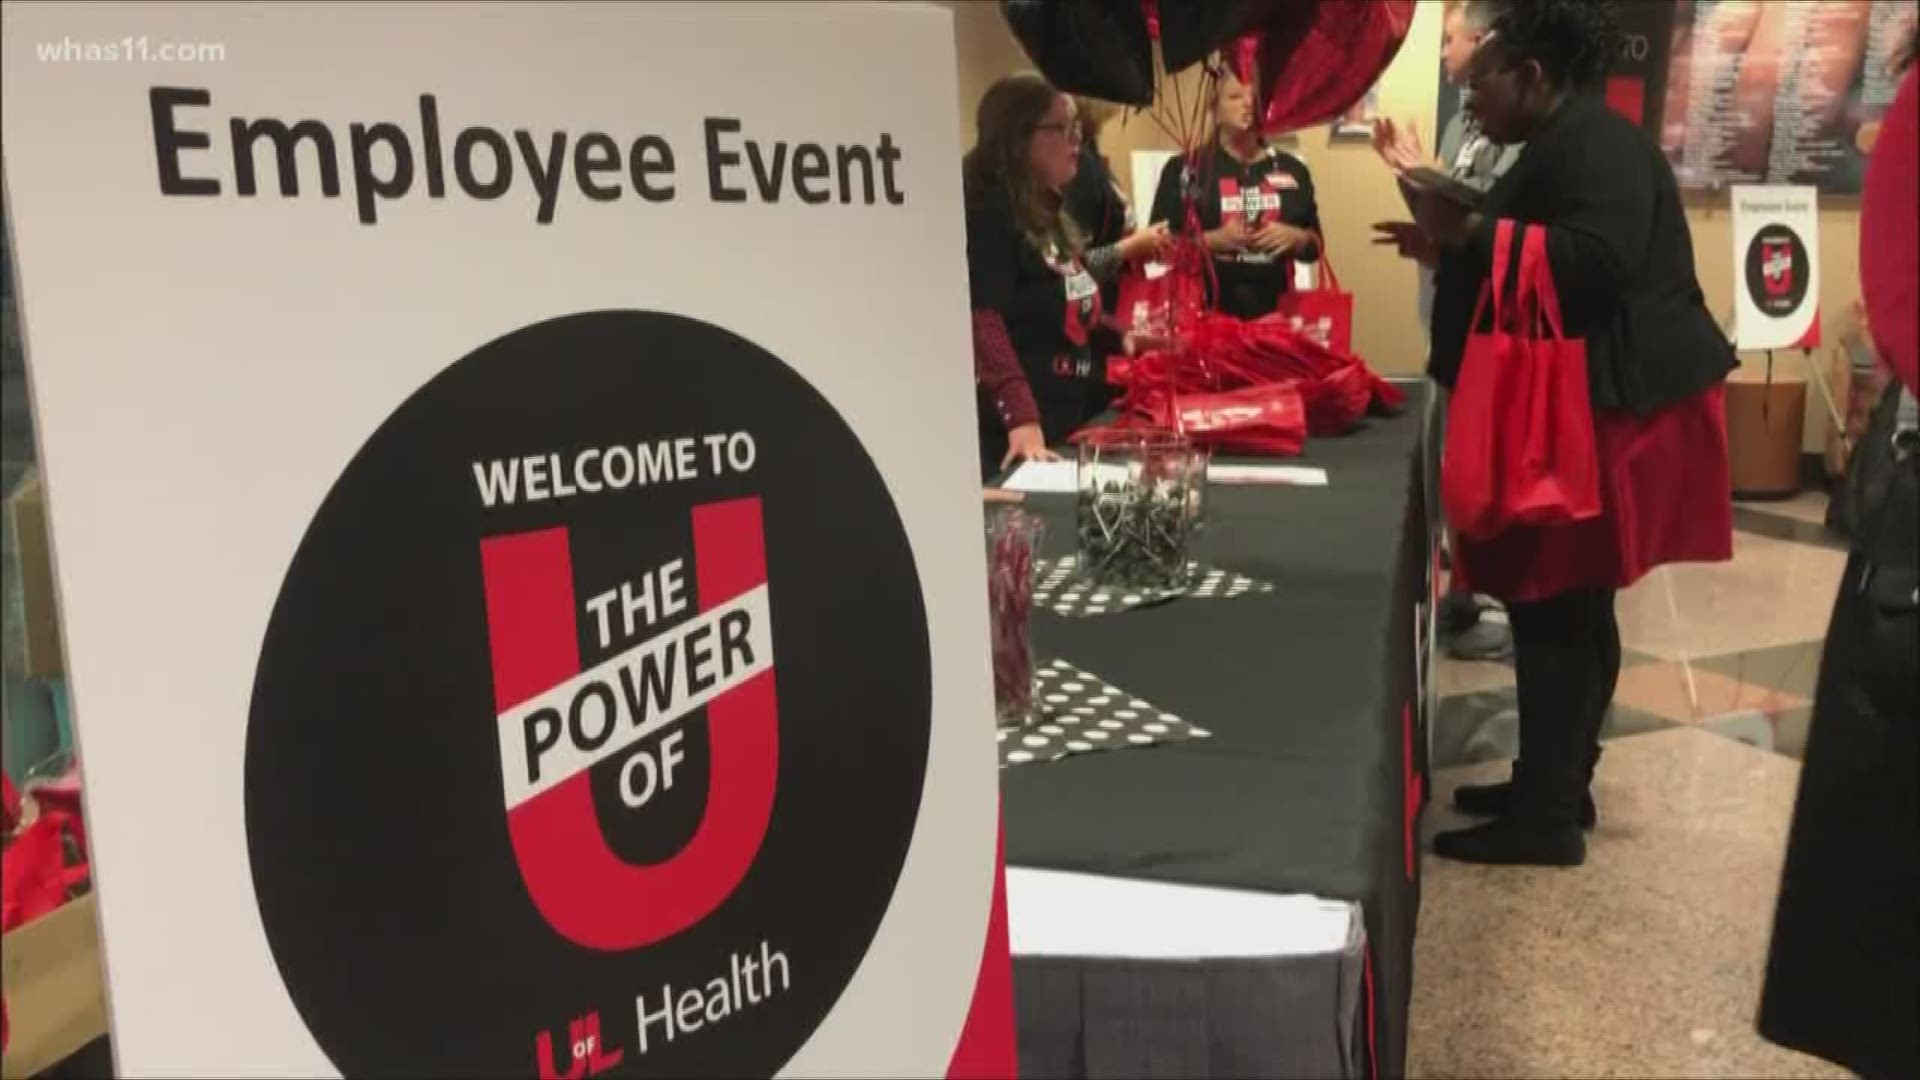 UofL Health kicked off a week-long celebration Monday, welcoming thousands of new employees who will help expand healthcare in Louisville.